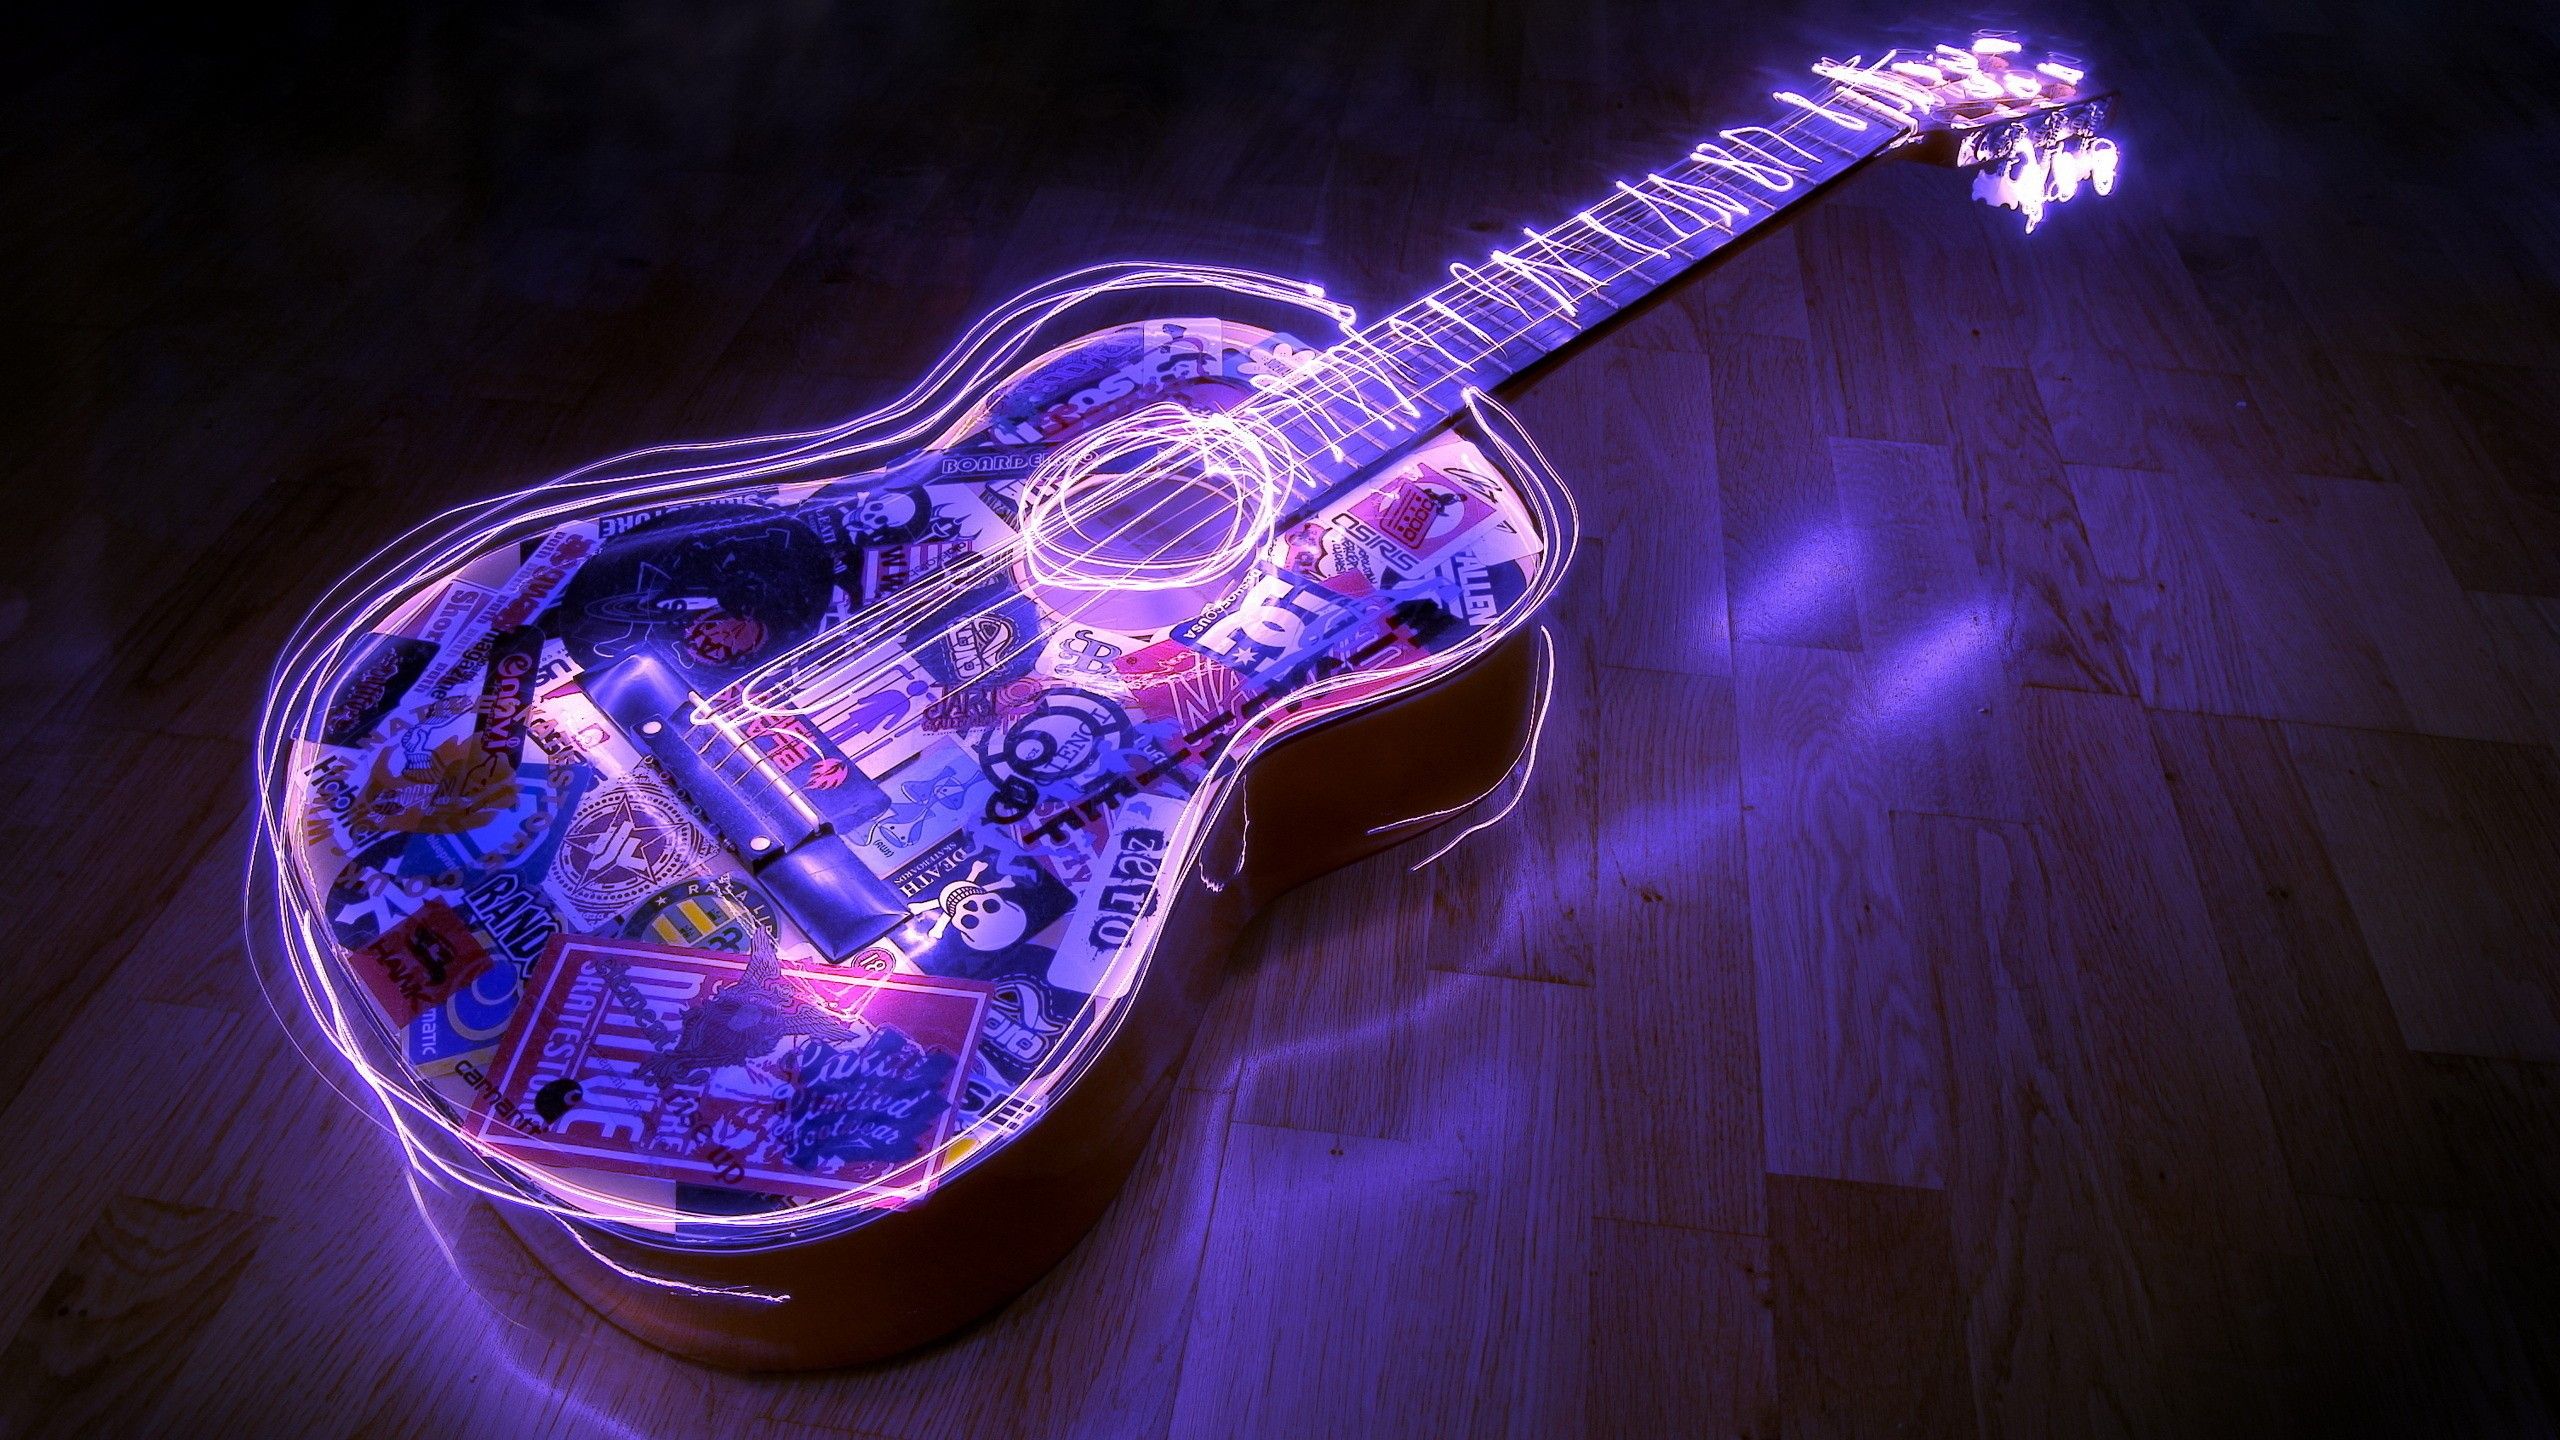 A guitar with glowing neon lights on it - Music, guitar